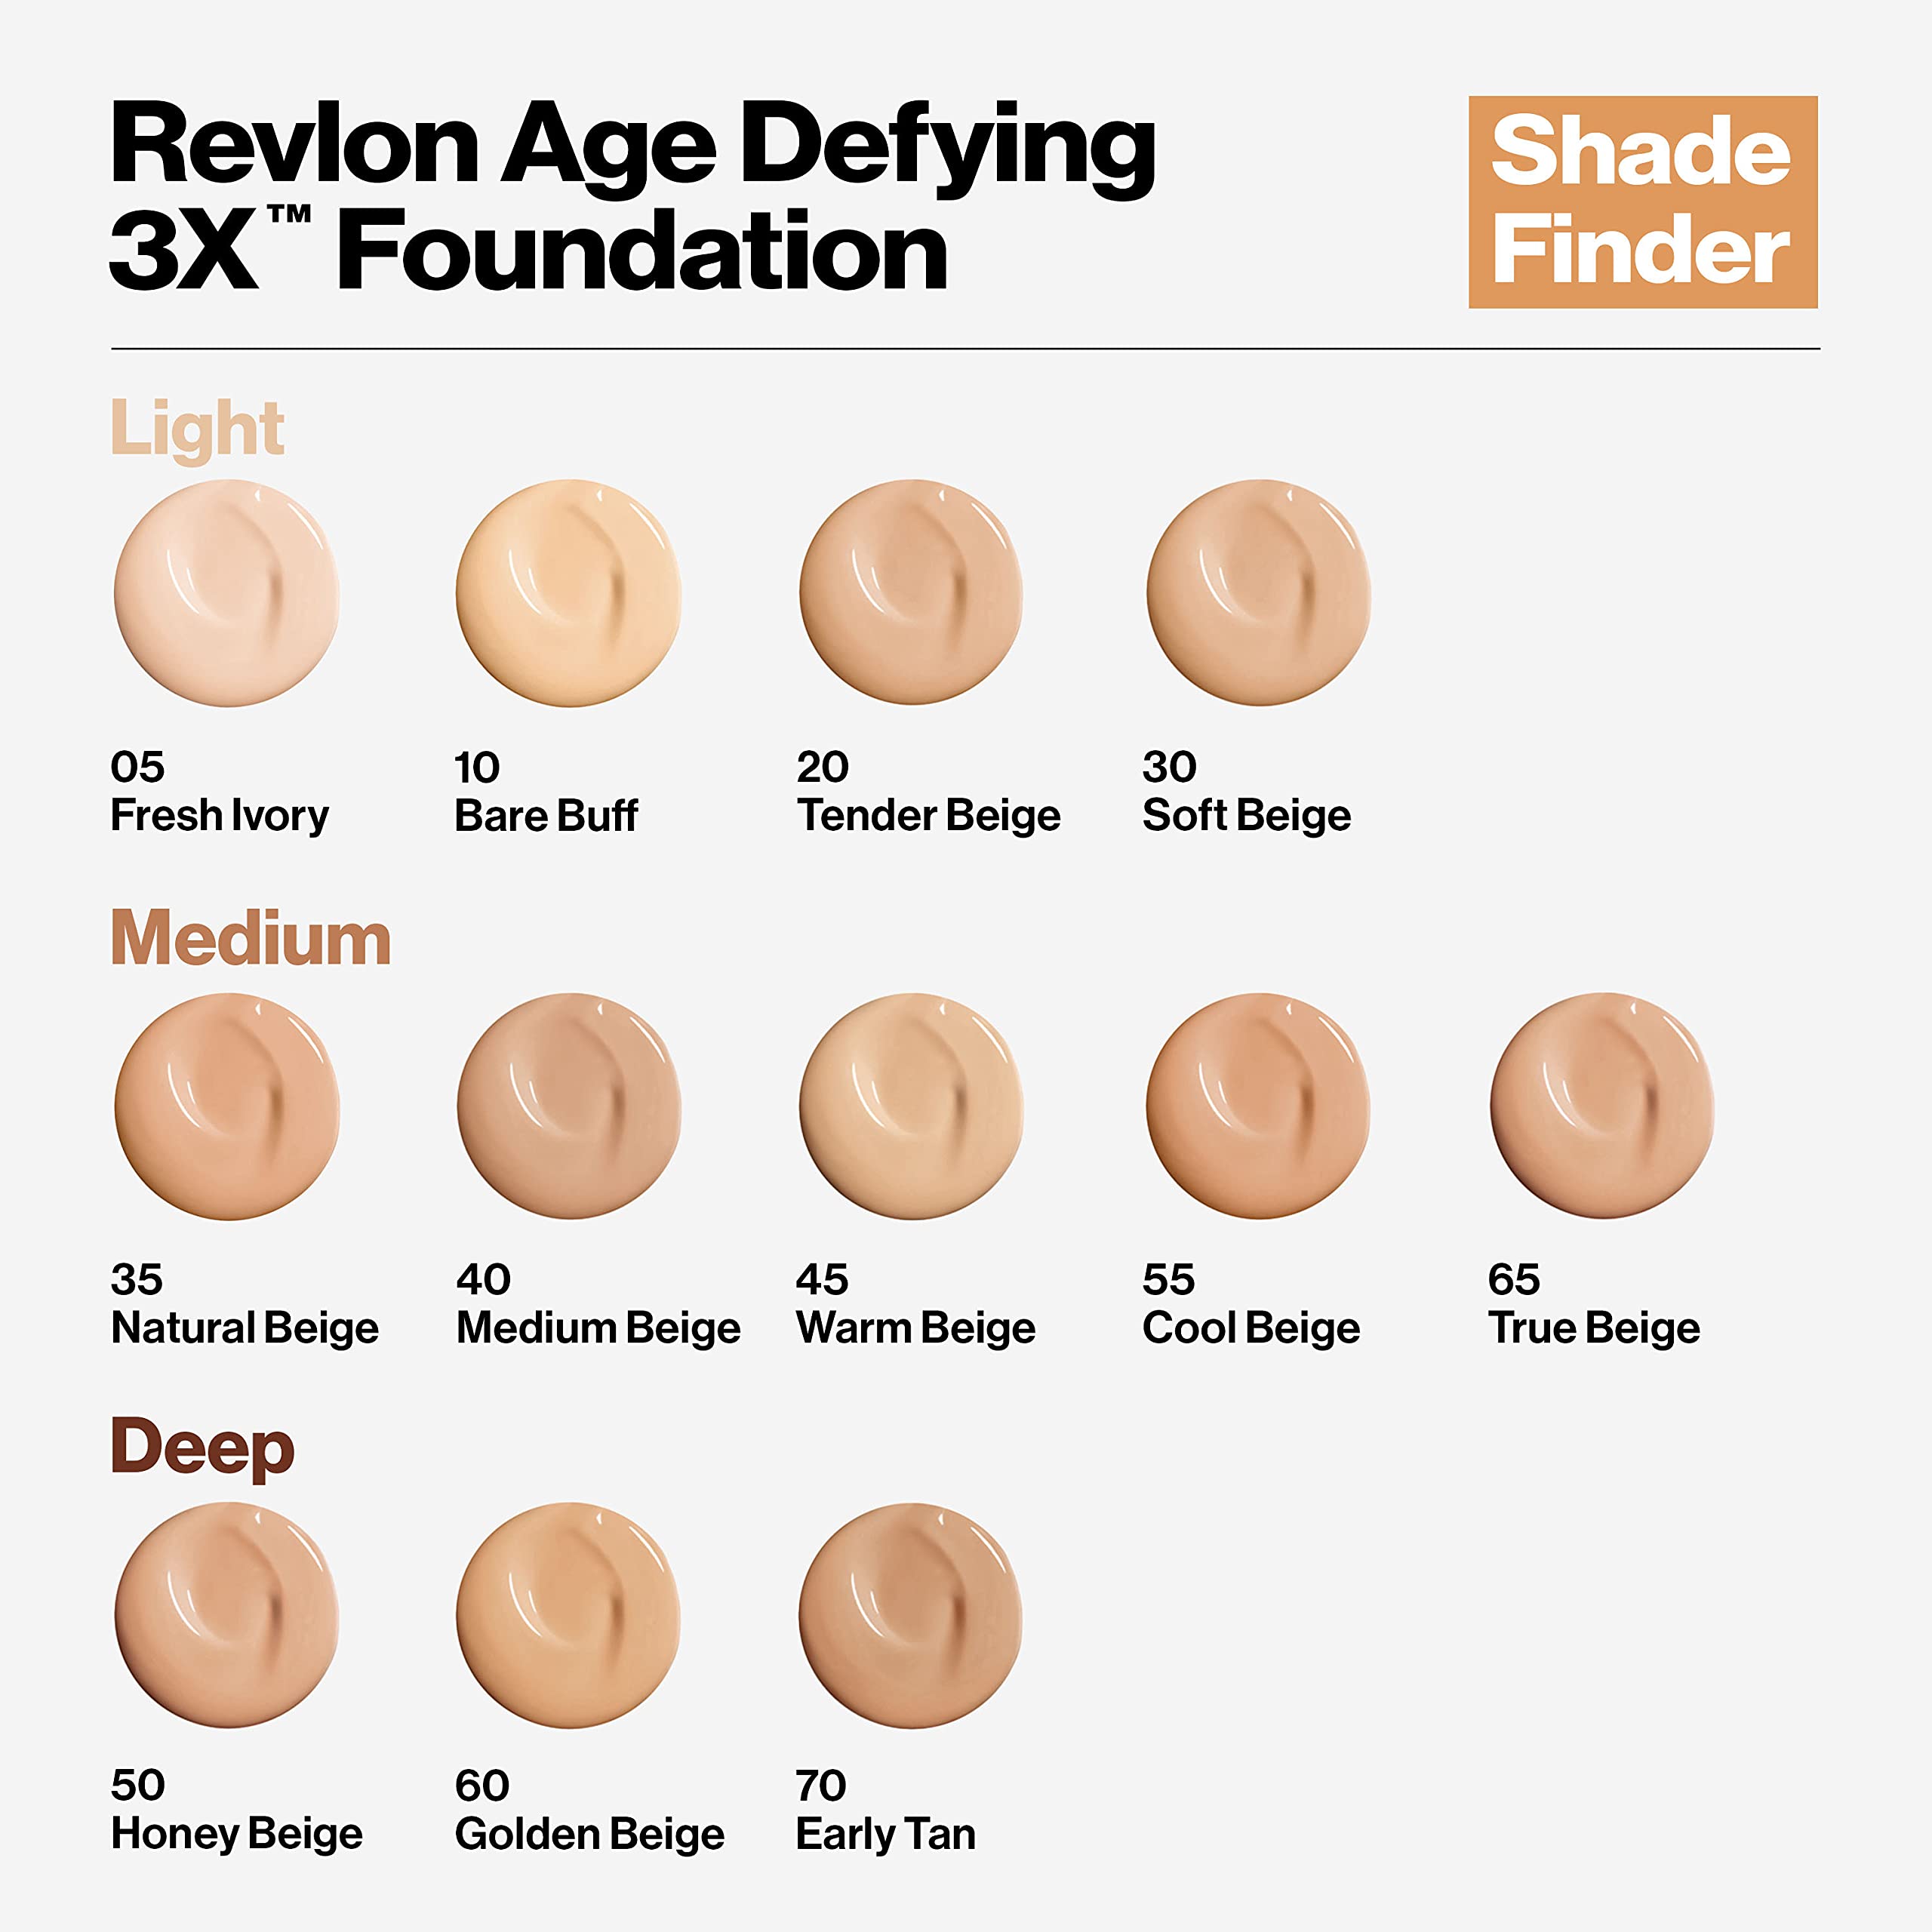 Revlon Age Defying 3X Makeup Foundation, Firming, Lifting and Anti-Aging Medium, Buildable Coverage with Natural Finish SPF 20, 065 True Beige, 1 fl oz